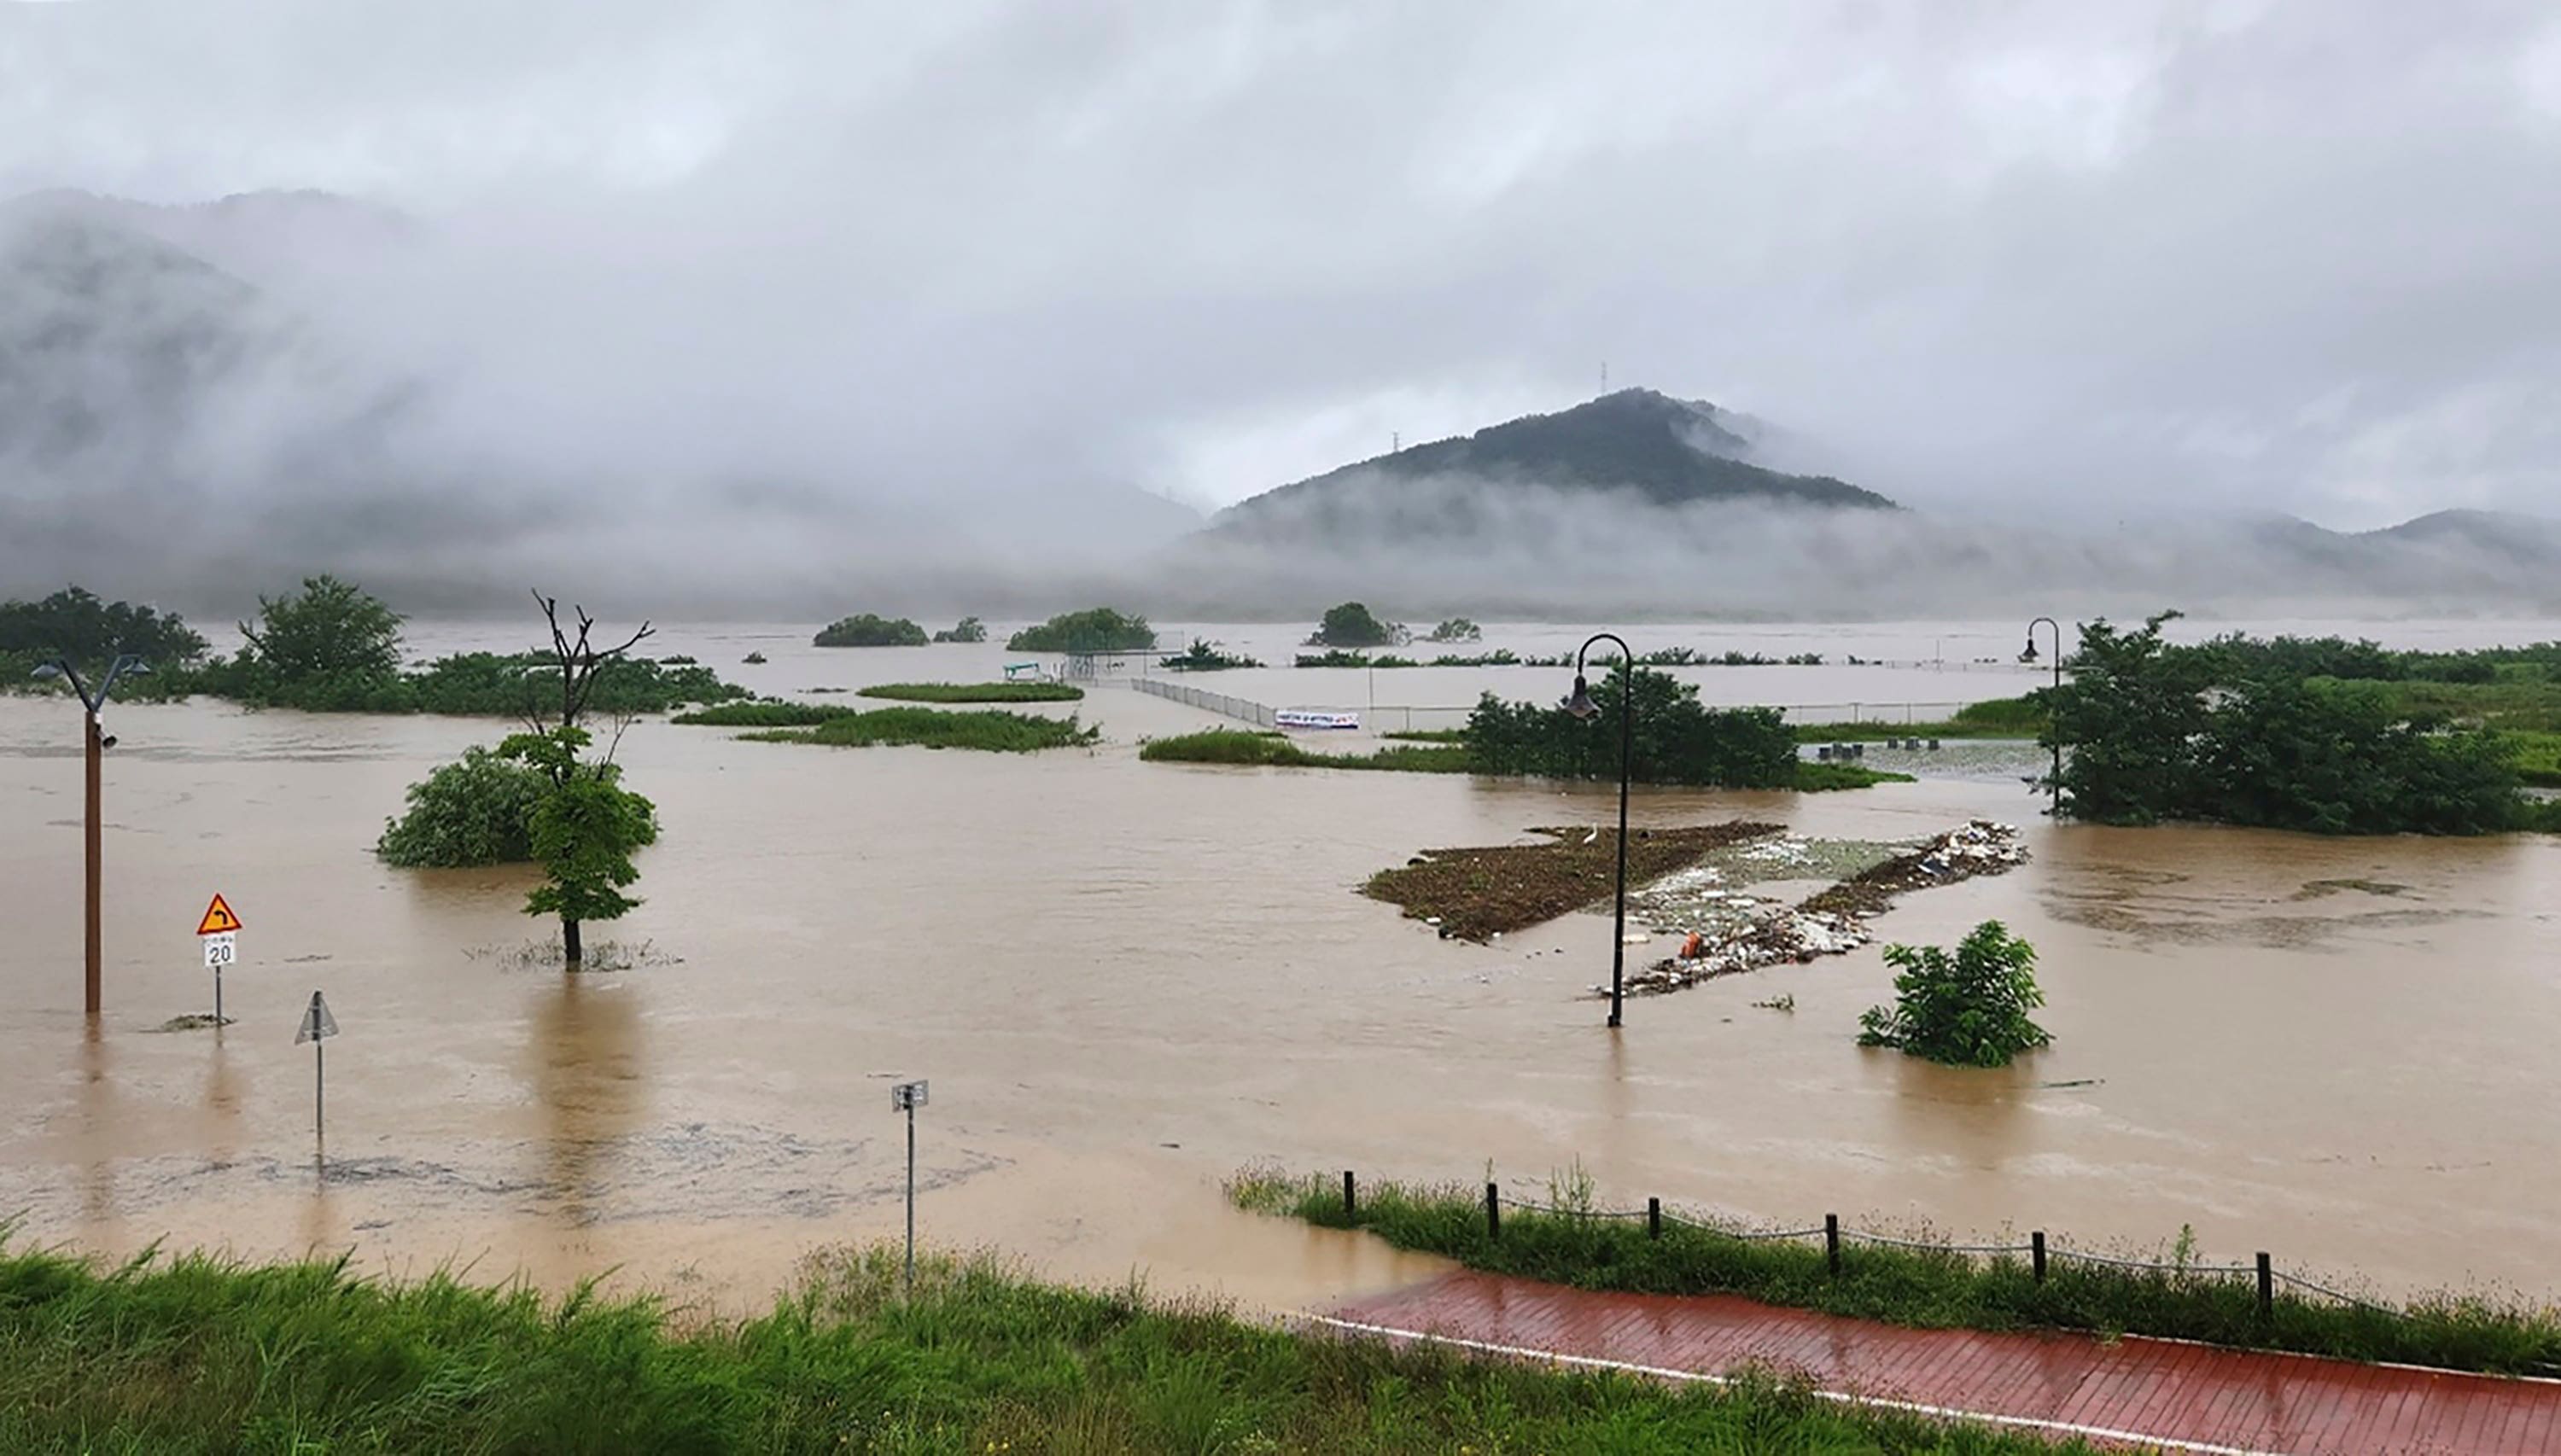 Flooding from the Geum River in Sejong.